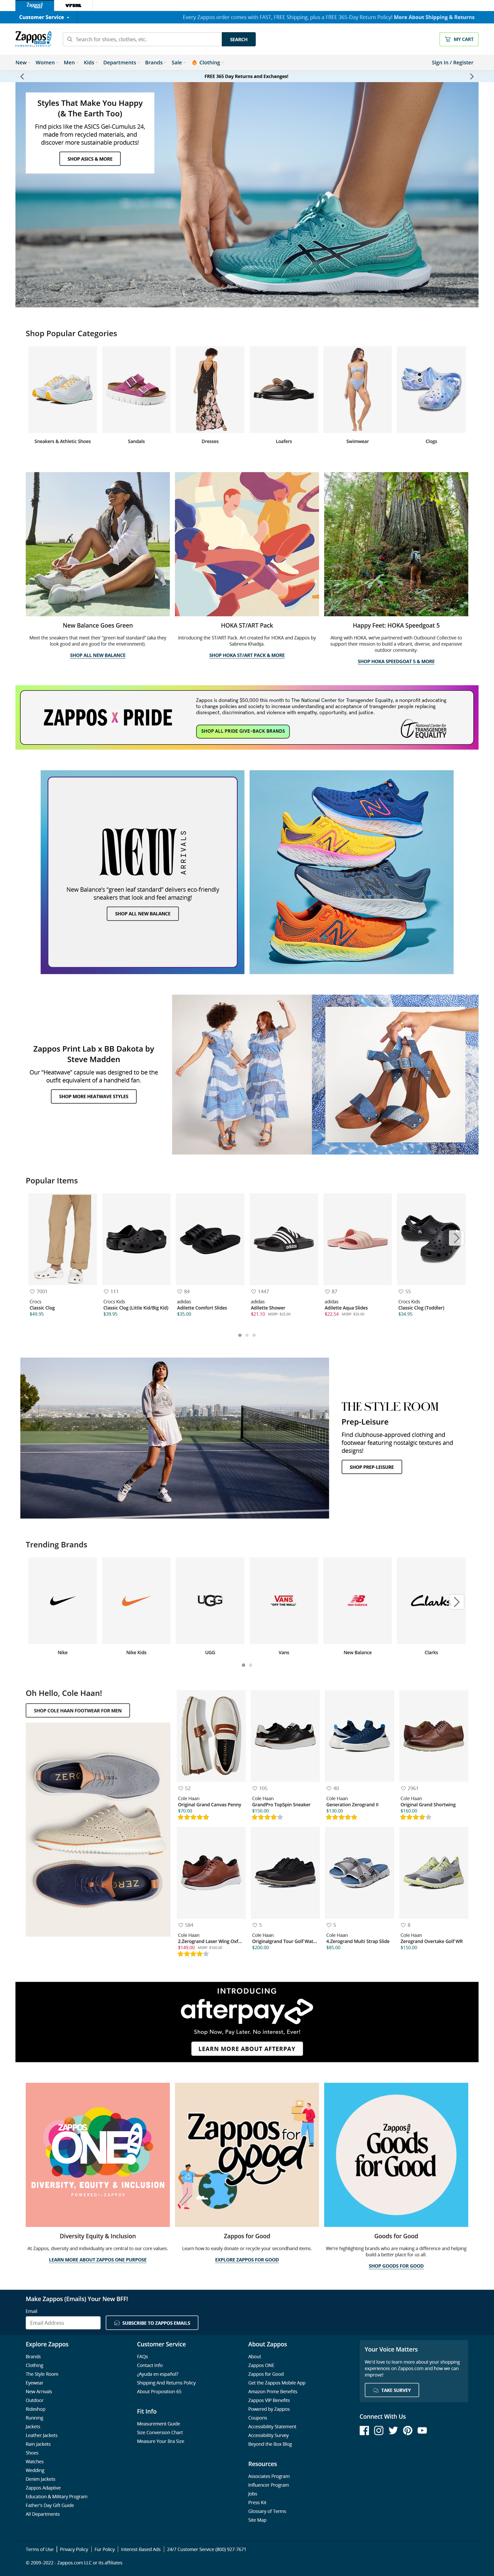 zappos-homepage.png